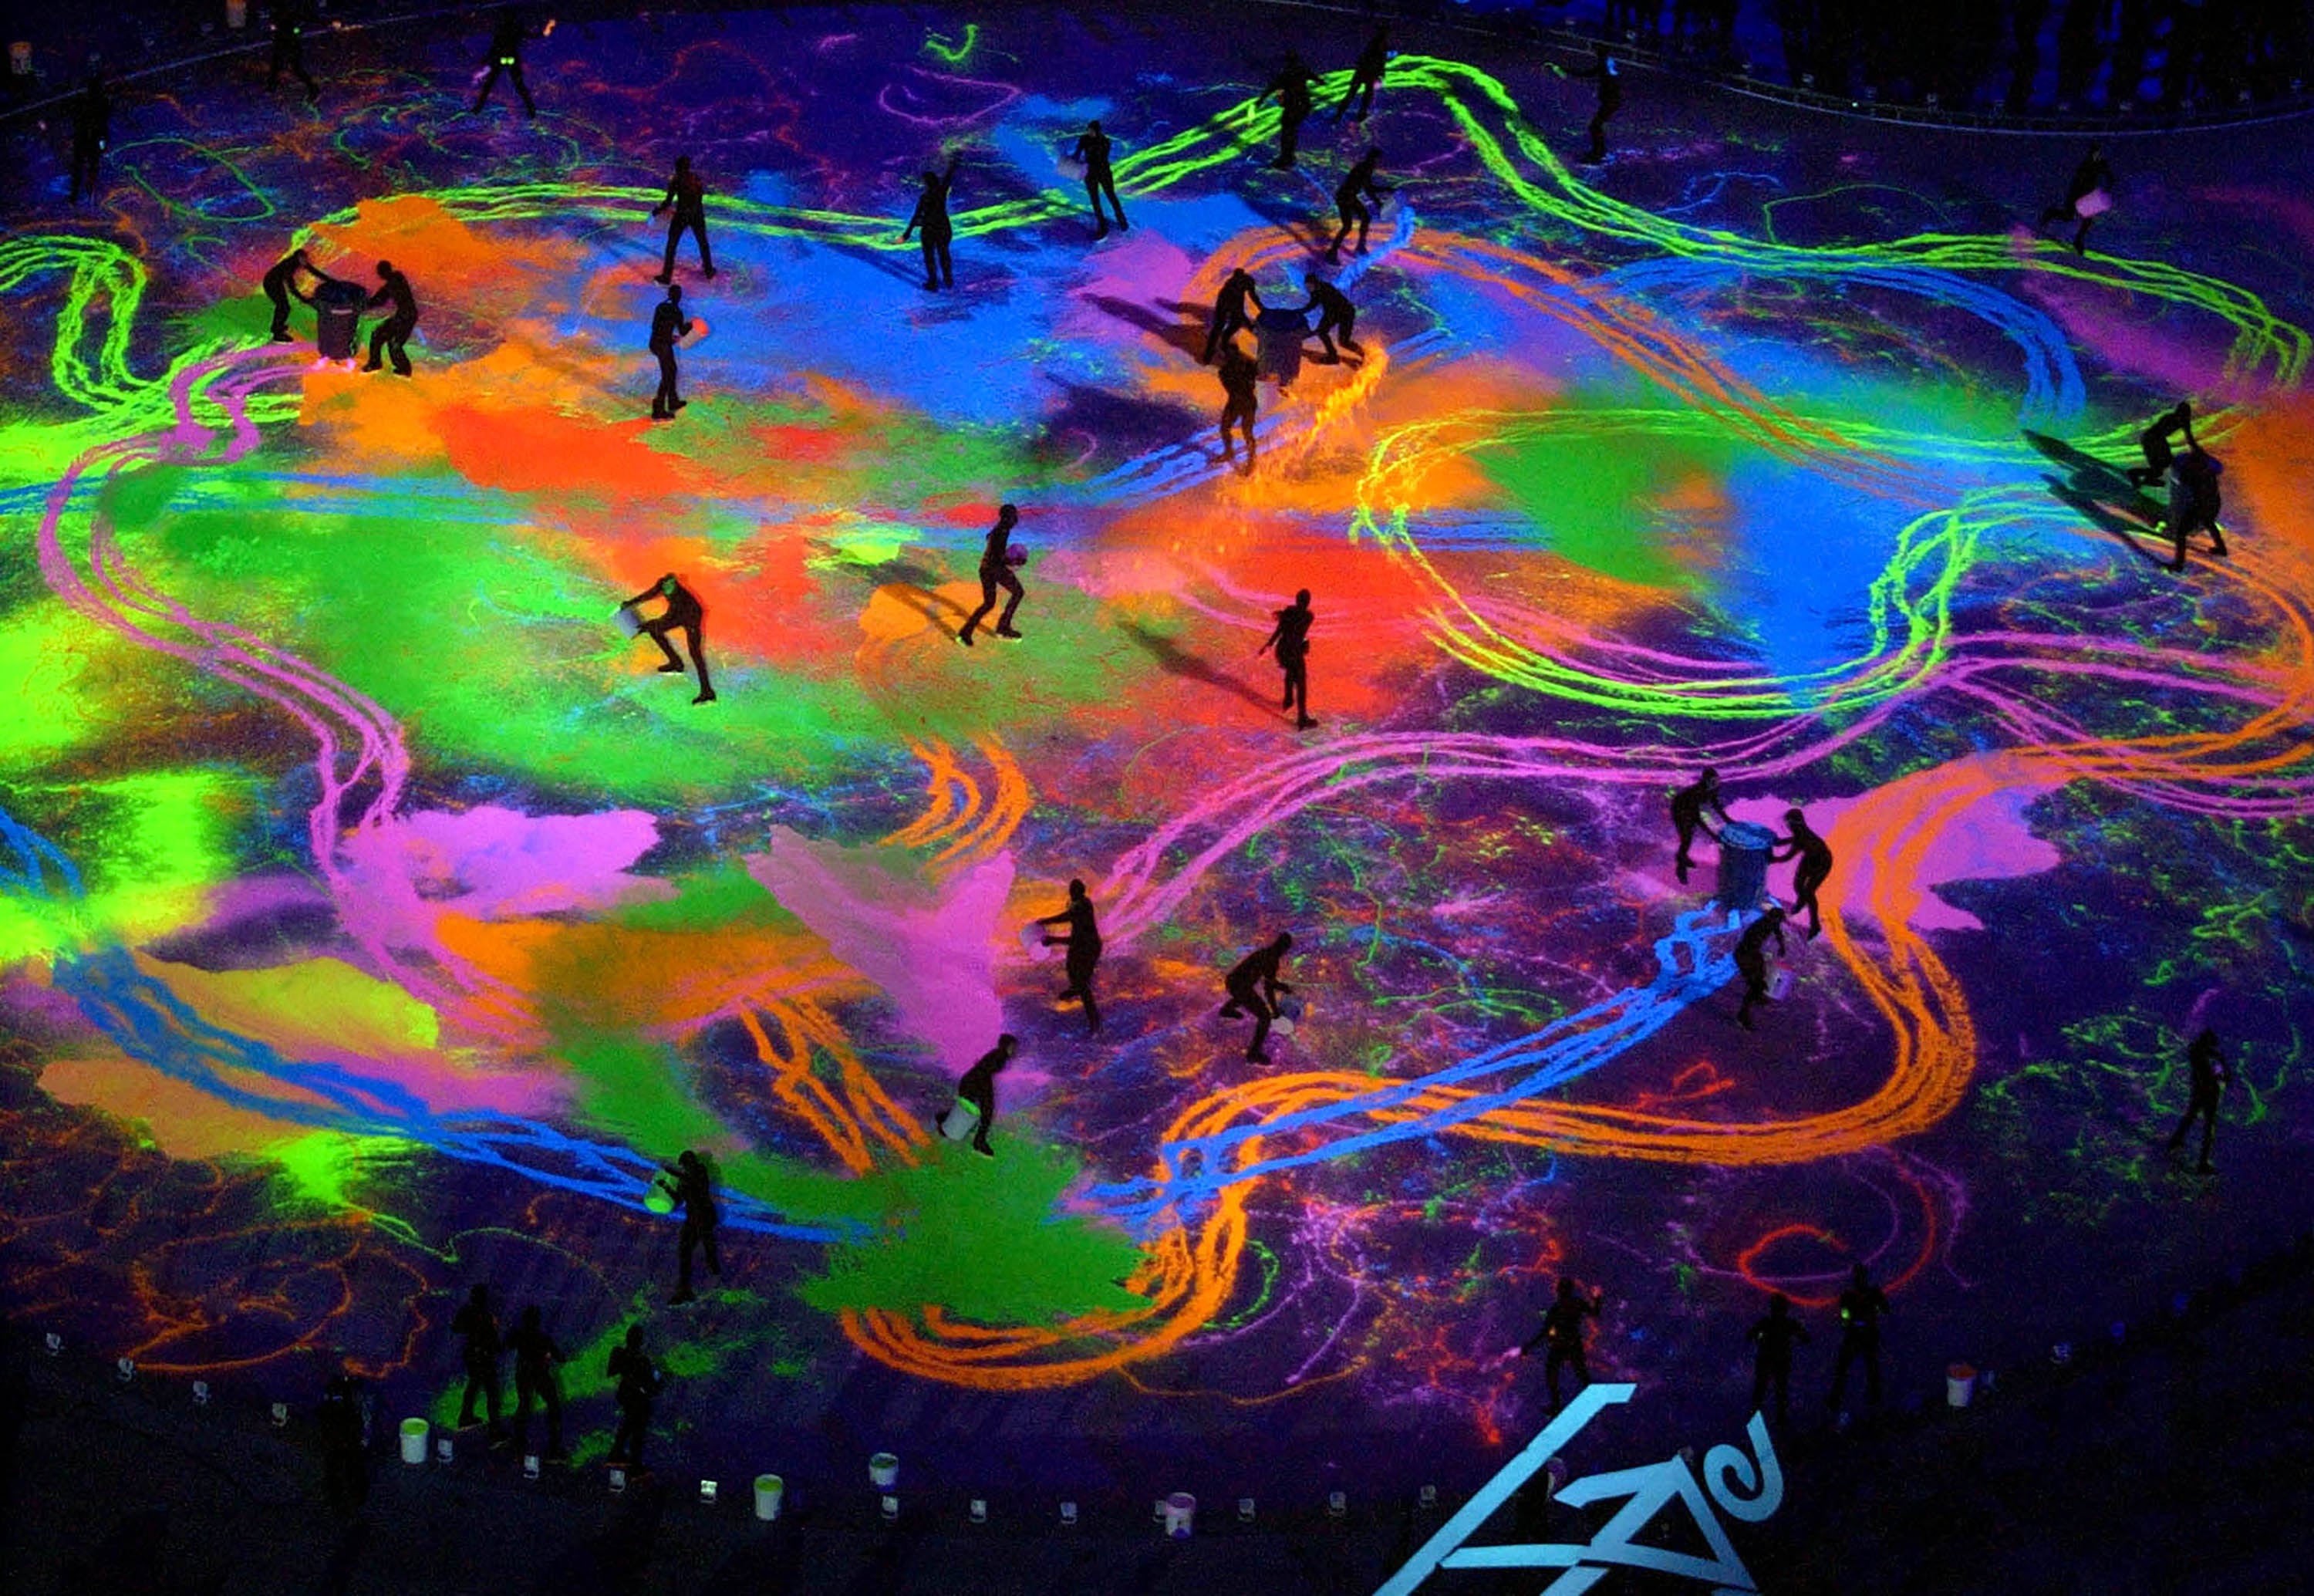 (Paul Fraughton | The Salt Lake Tribune) The stage ice is covered with colored sand under black light during the closing ceremony of the 2002 Winter Olympics at Rice-Eccles Stadium in Salt Lake City, Sunday, Feb. 24, 2002.